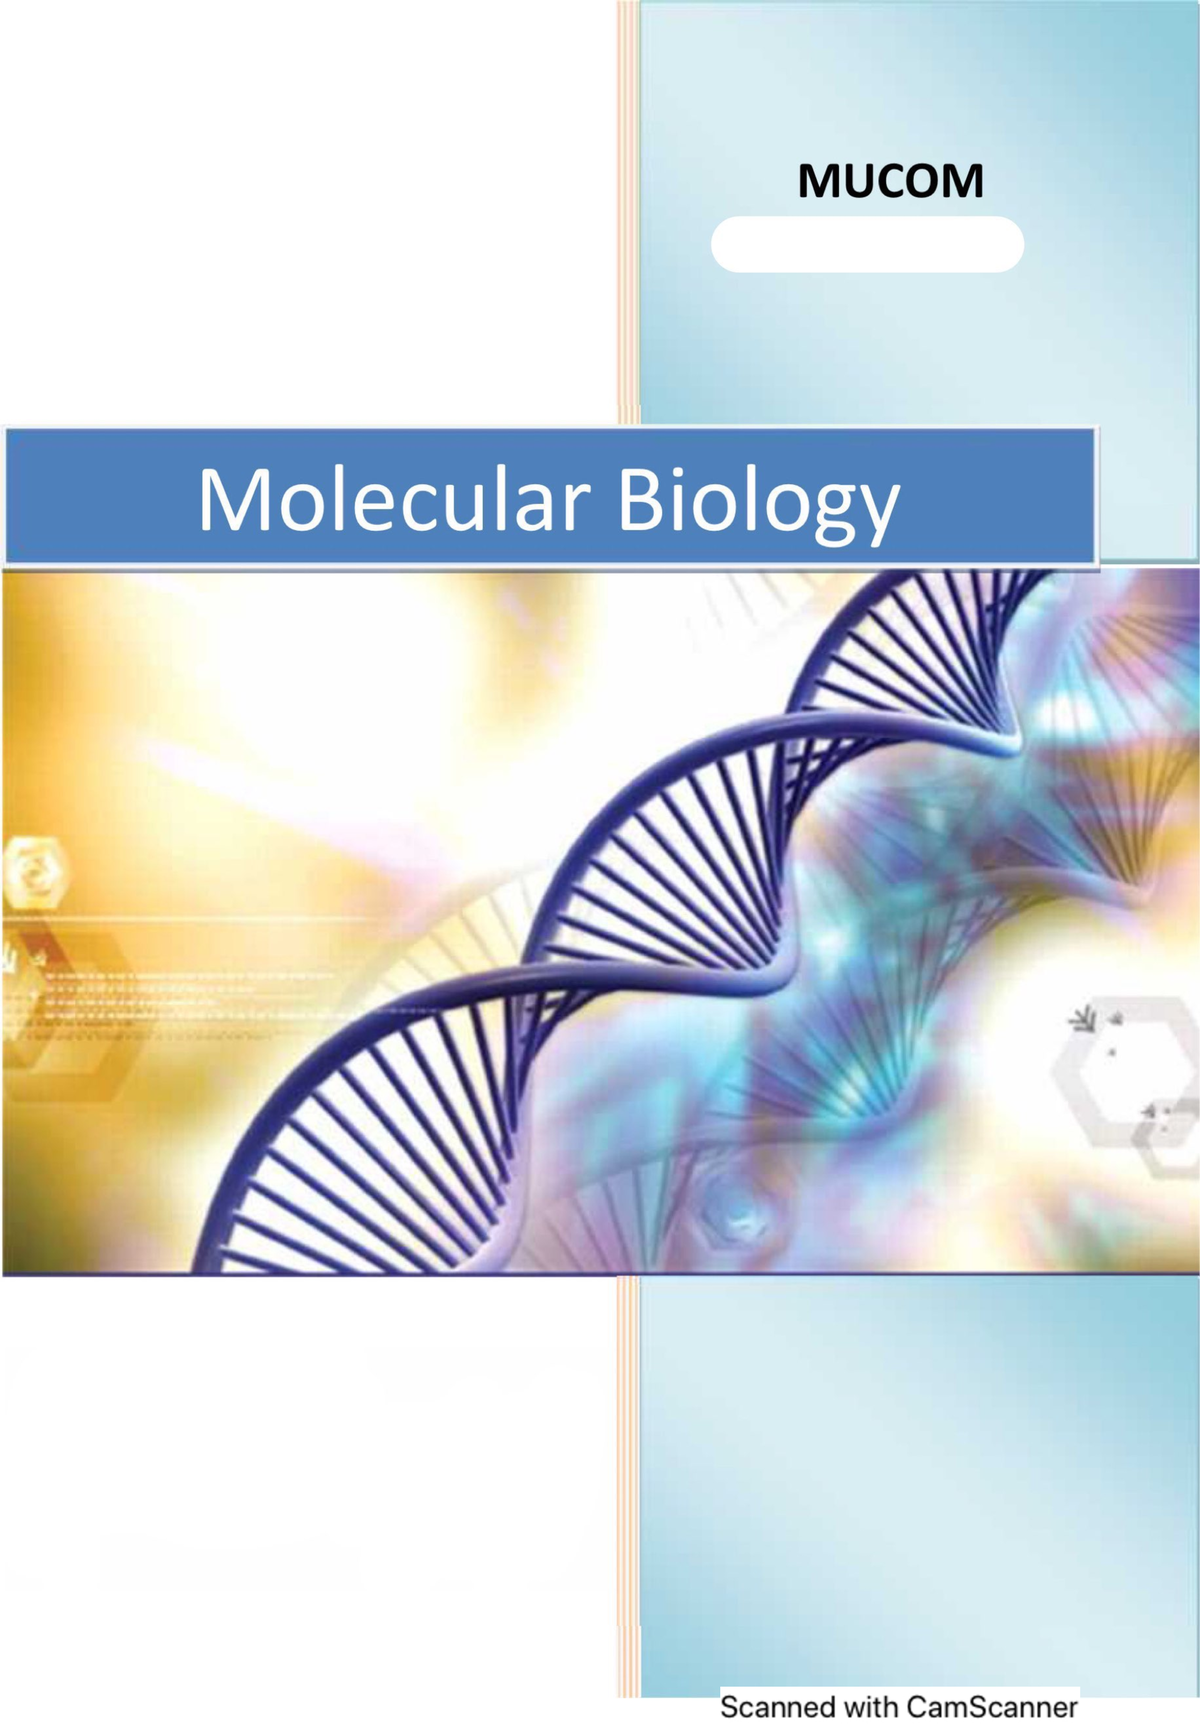 molecular biology research papers pdf